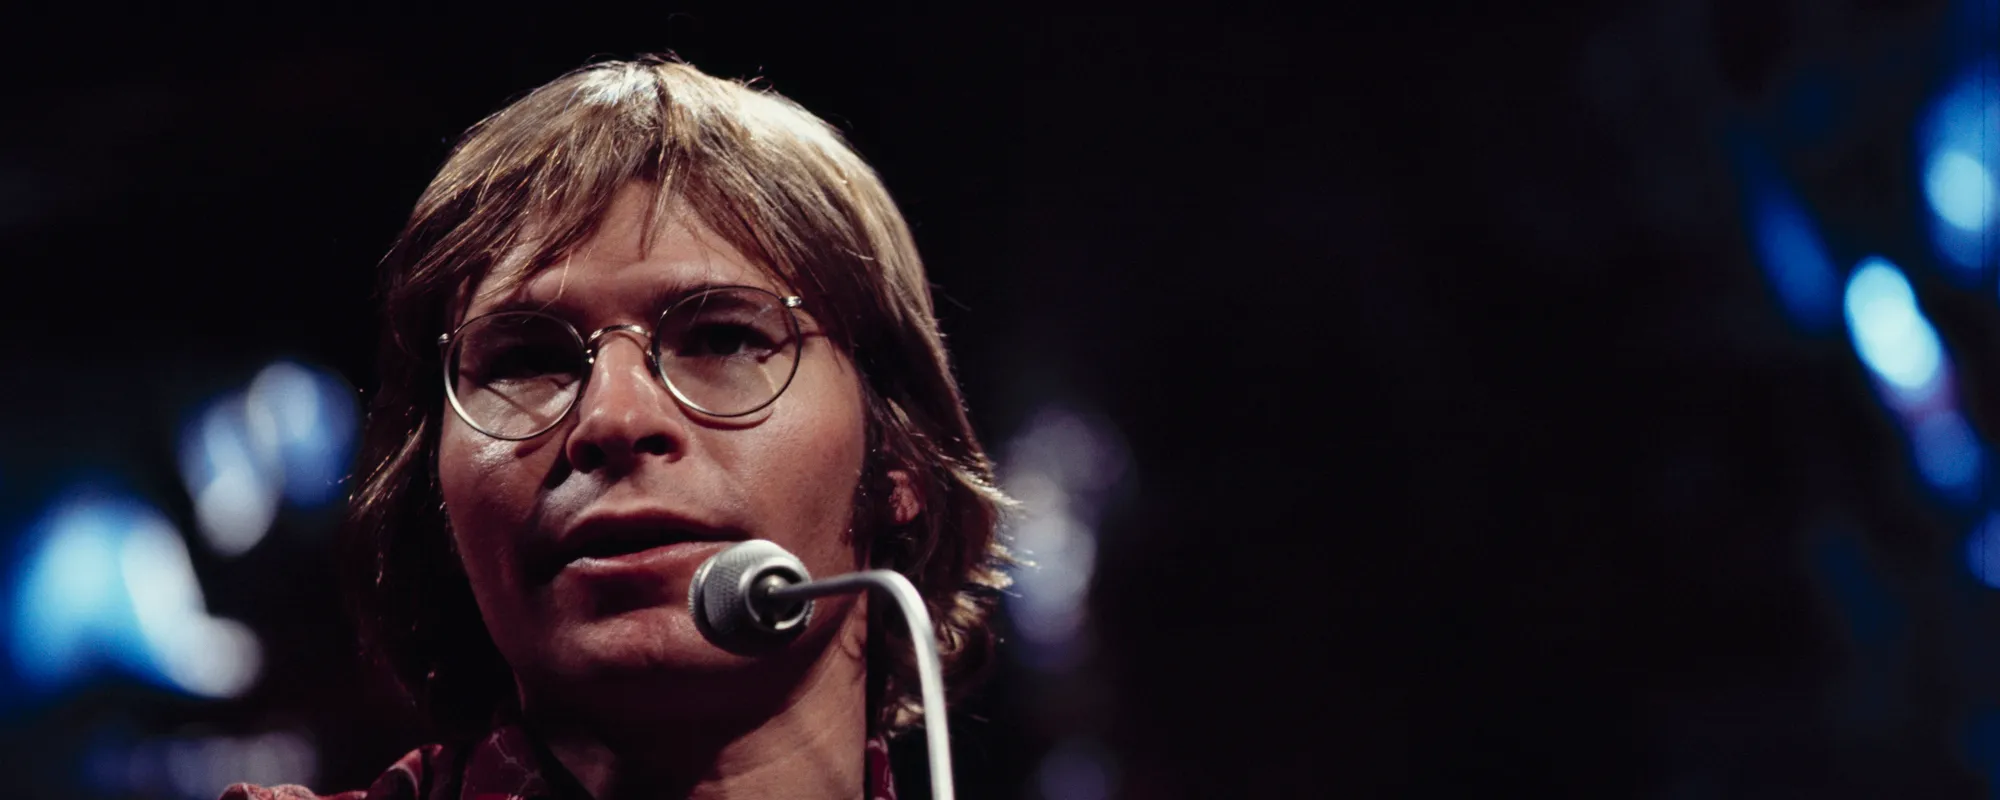 Almost Heaven: The Story Behind “Take Me Home, Country Roads” by John Denver